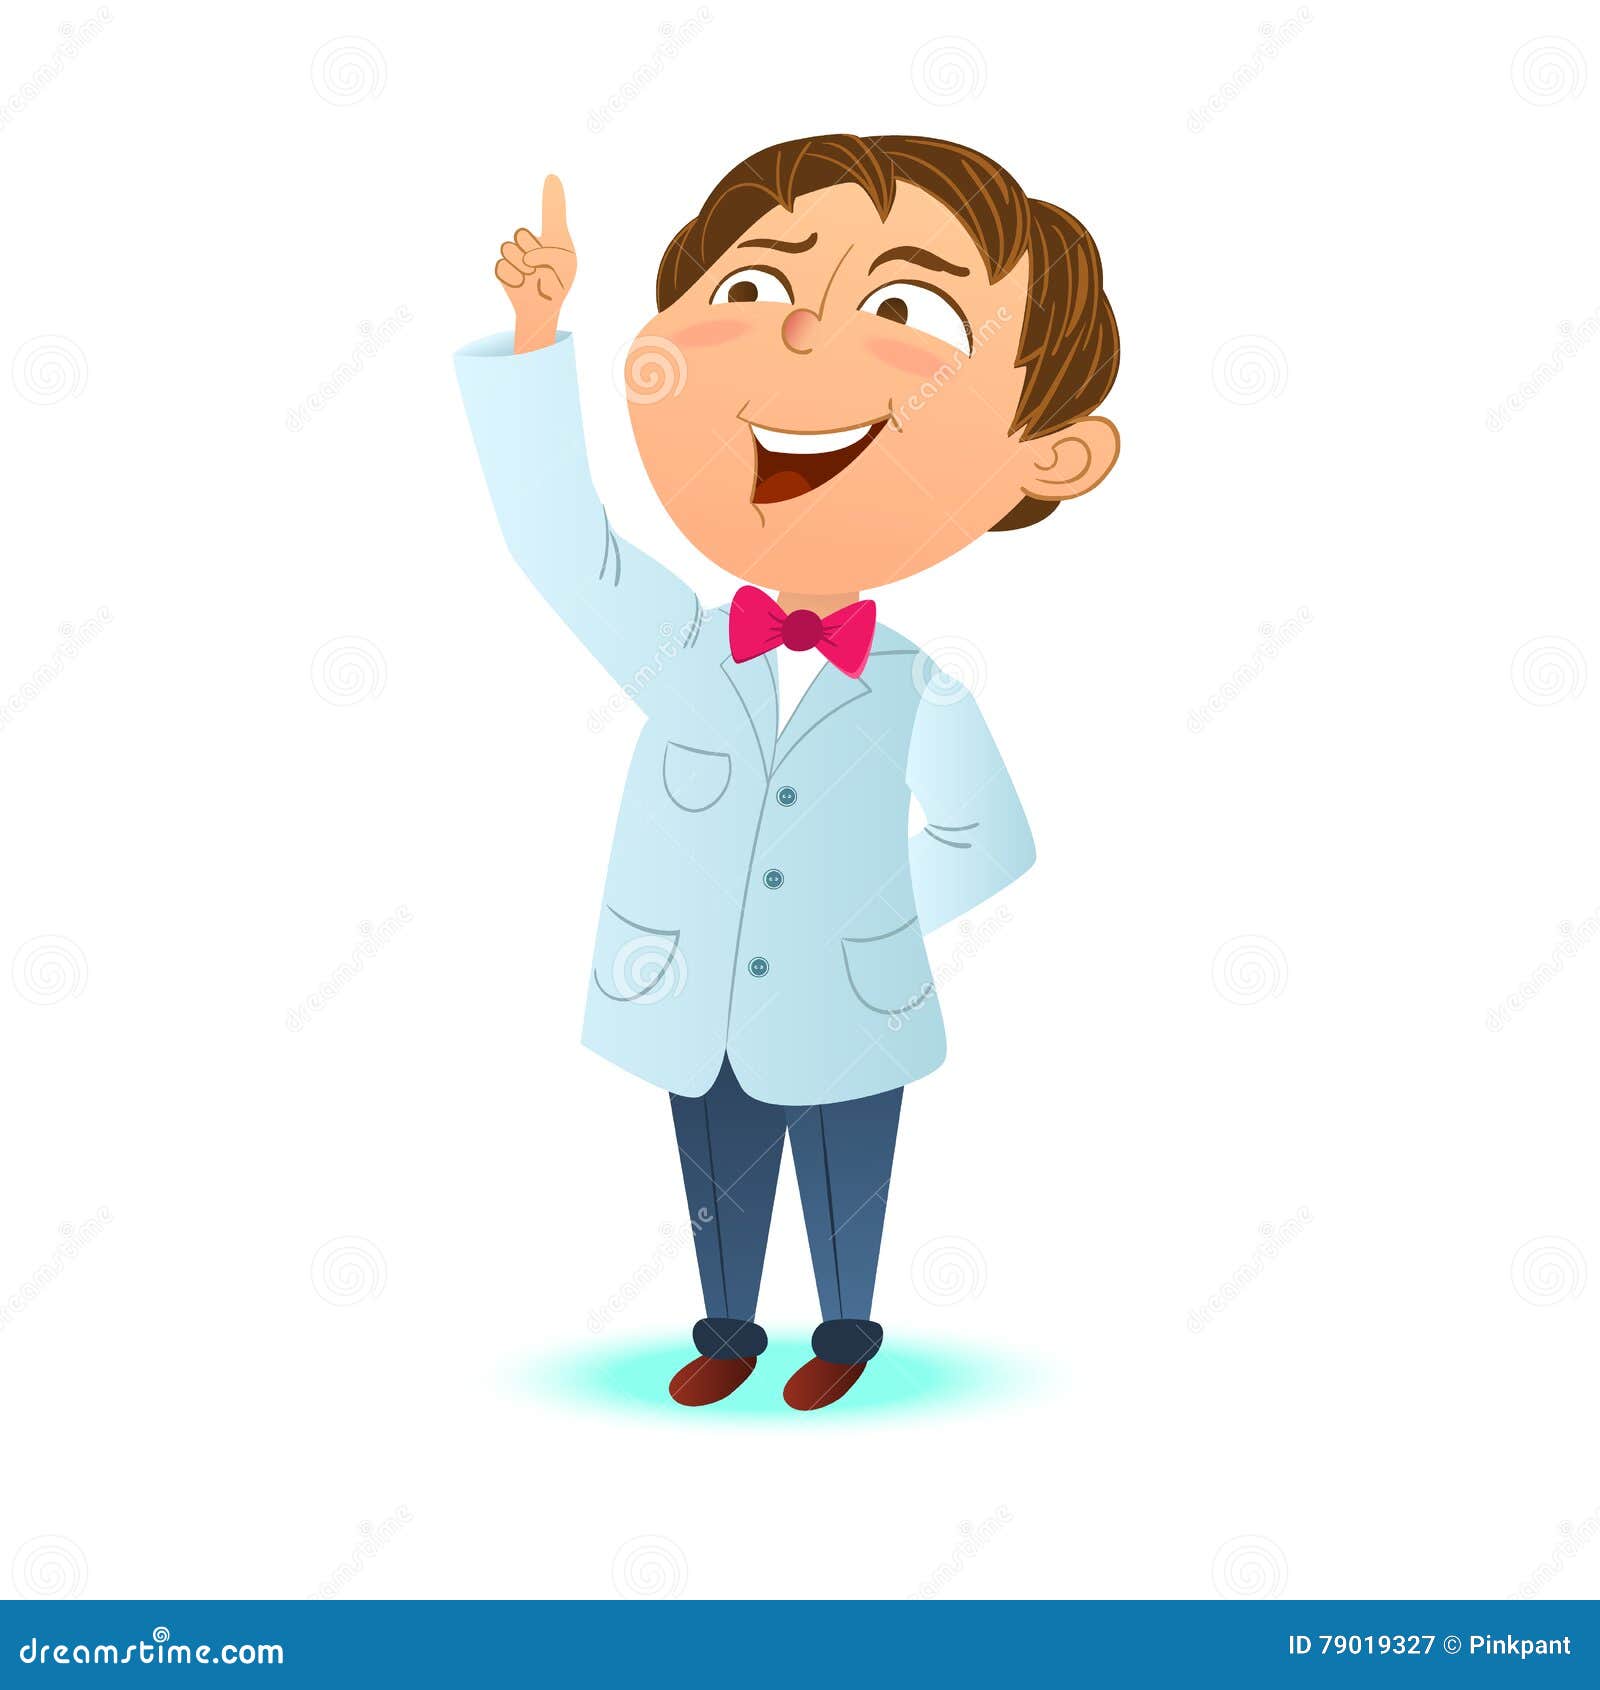 Cute Clever Kid, a Boy Scientist Index Finger Up. Clever Boy Got the Idea  Stock Vector - Illustration of clever, background: 79019327